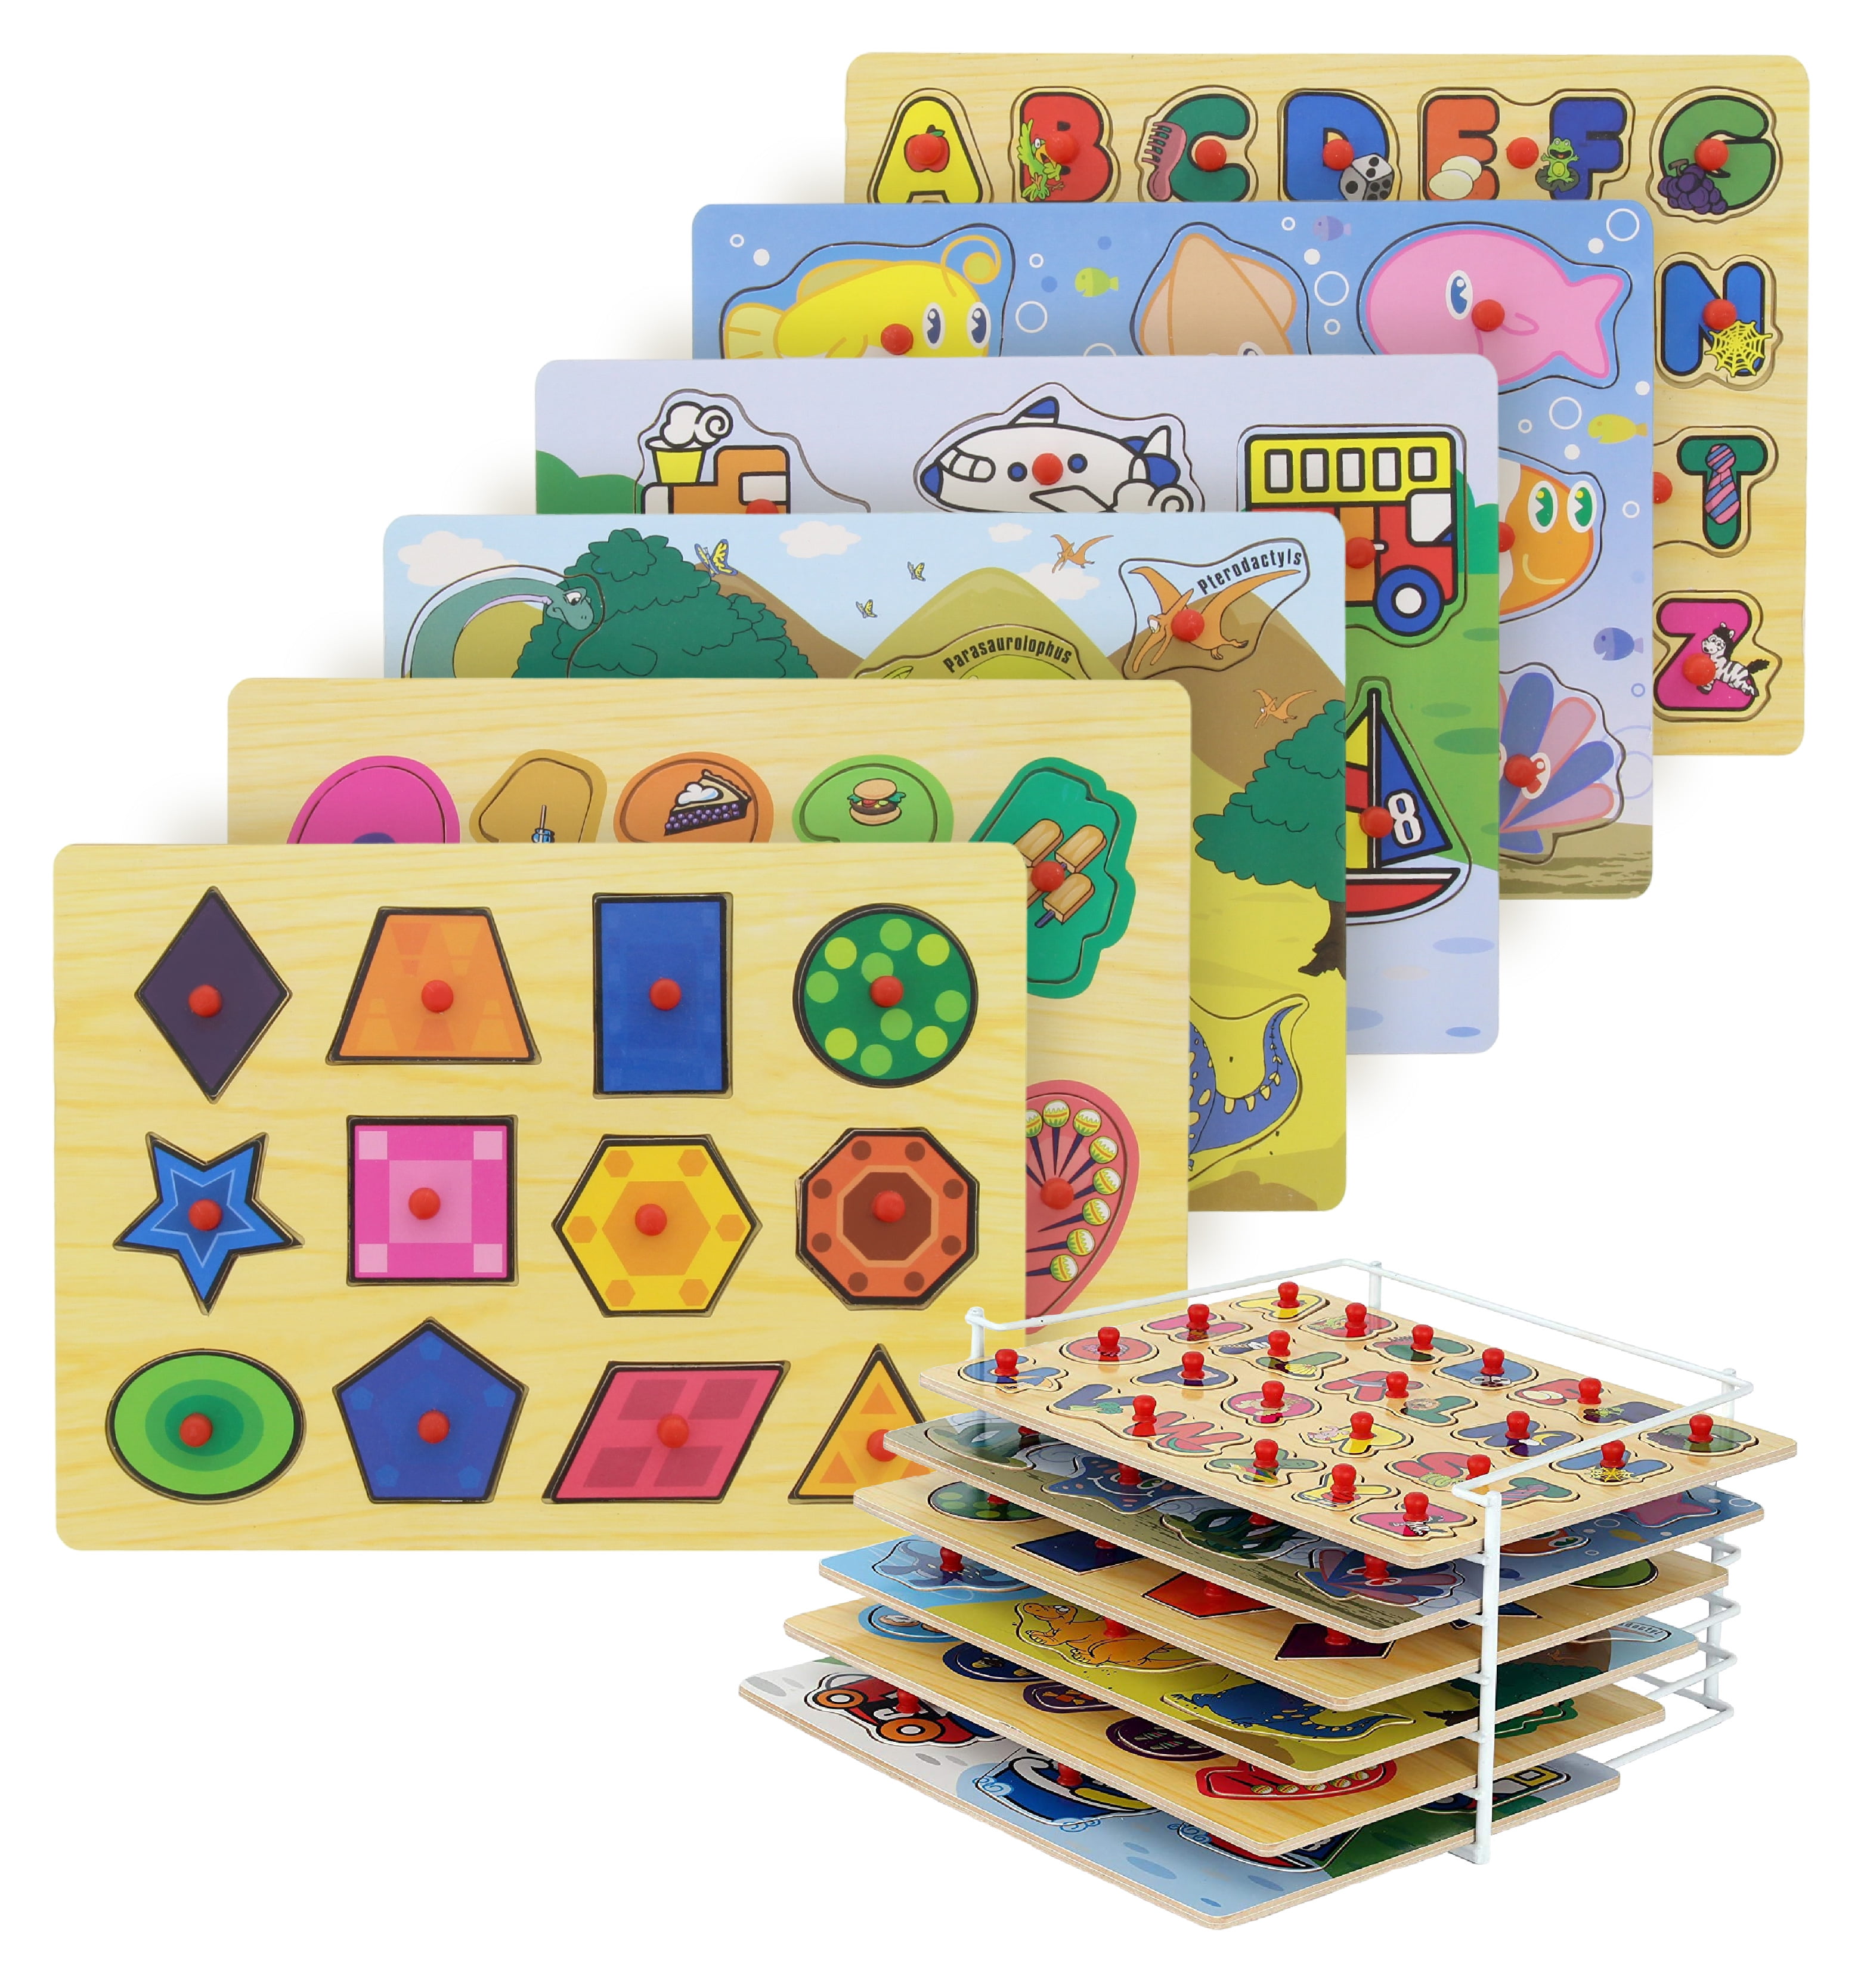 KIDS CHILDRENS 3D WOODEN LEARNING PUZZLE MODEL WOOD KIT TOY 6 DESIGNS 